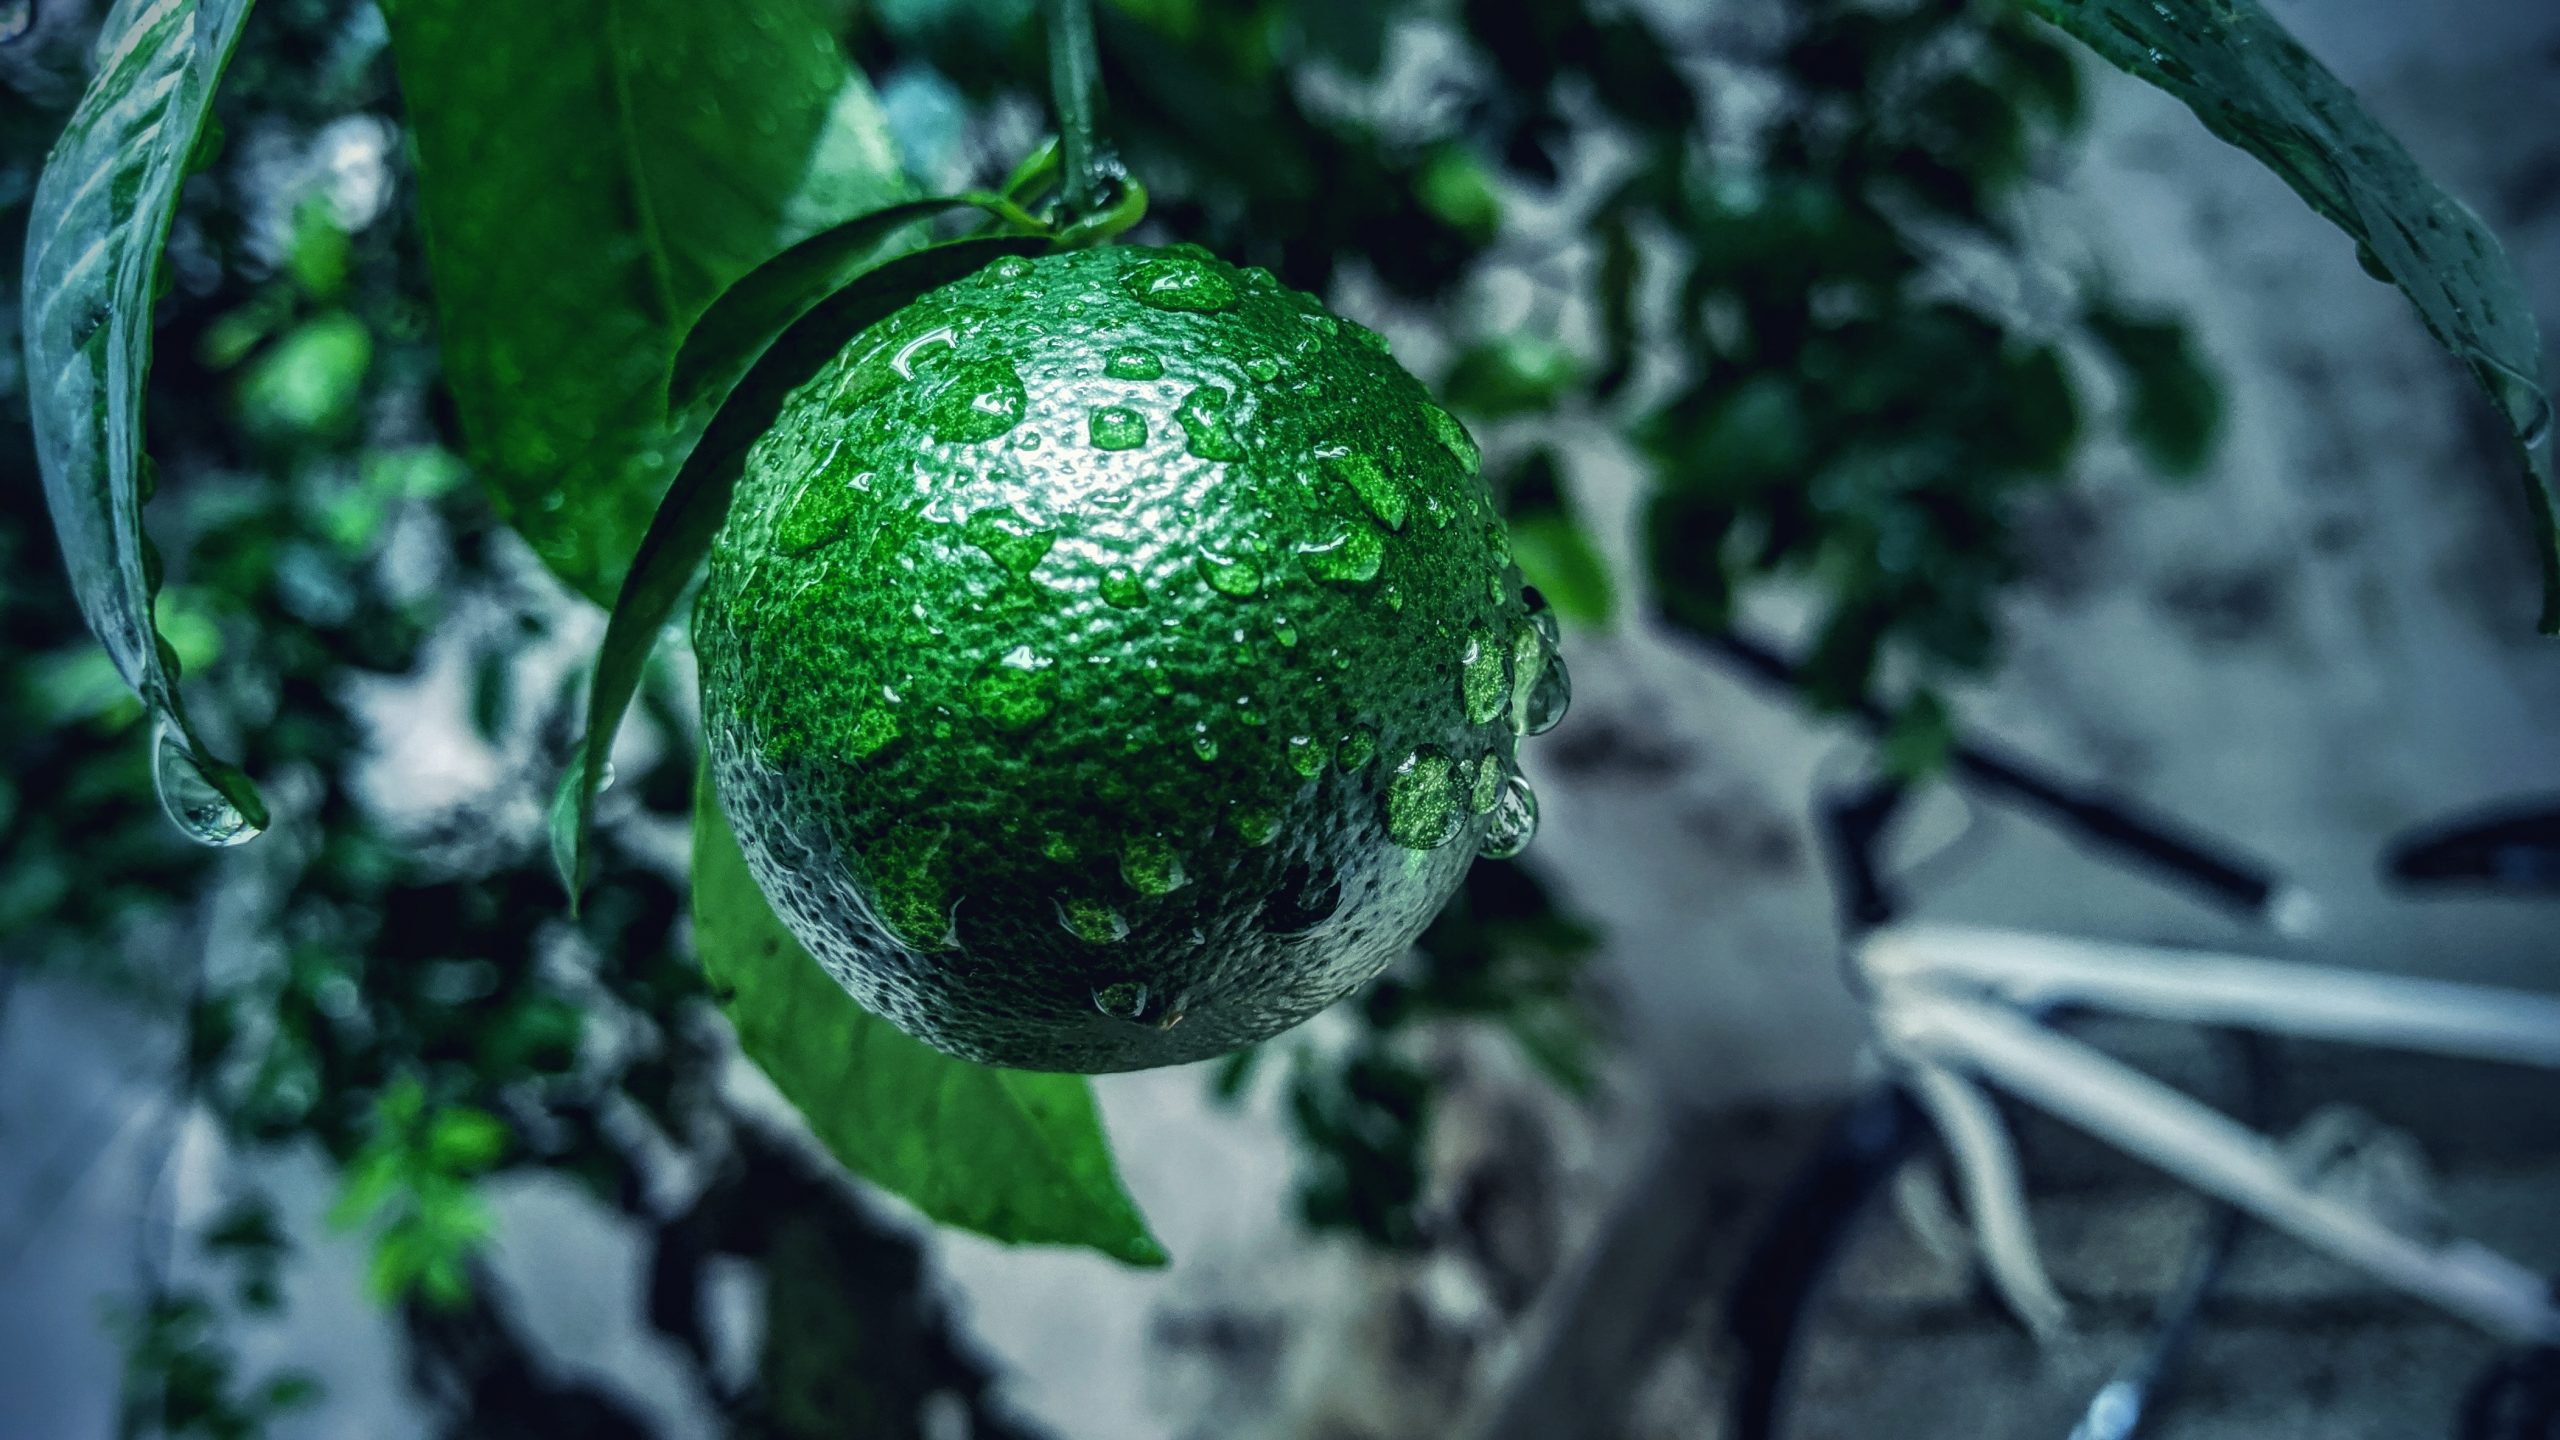 Water drops on a fruit